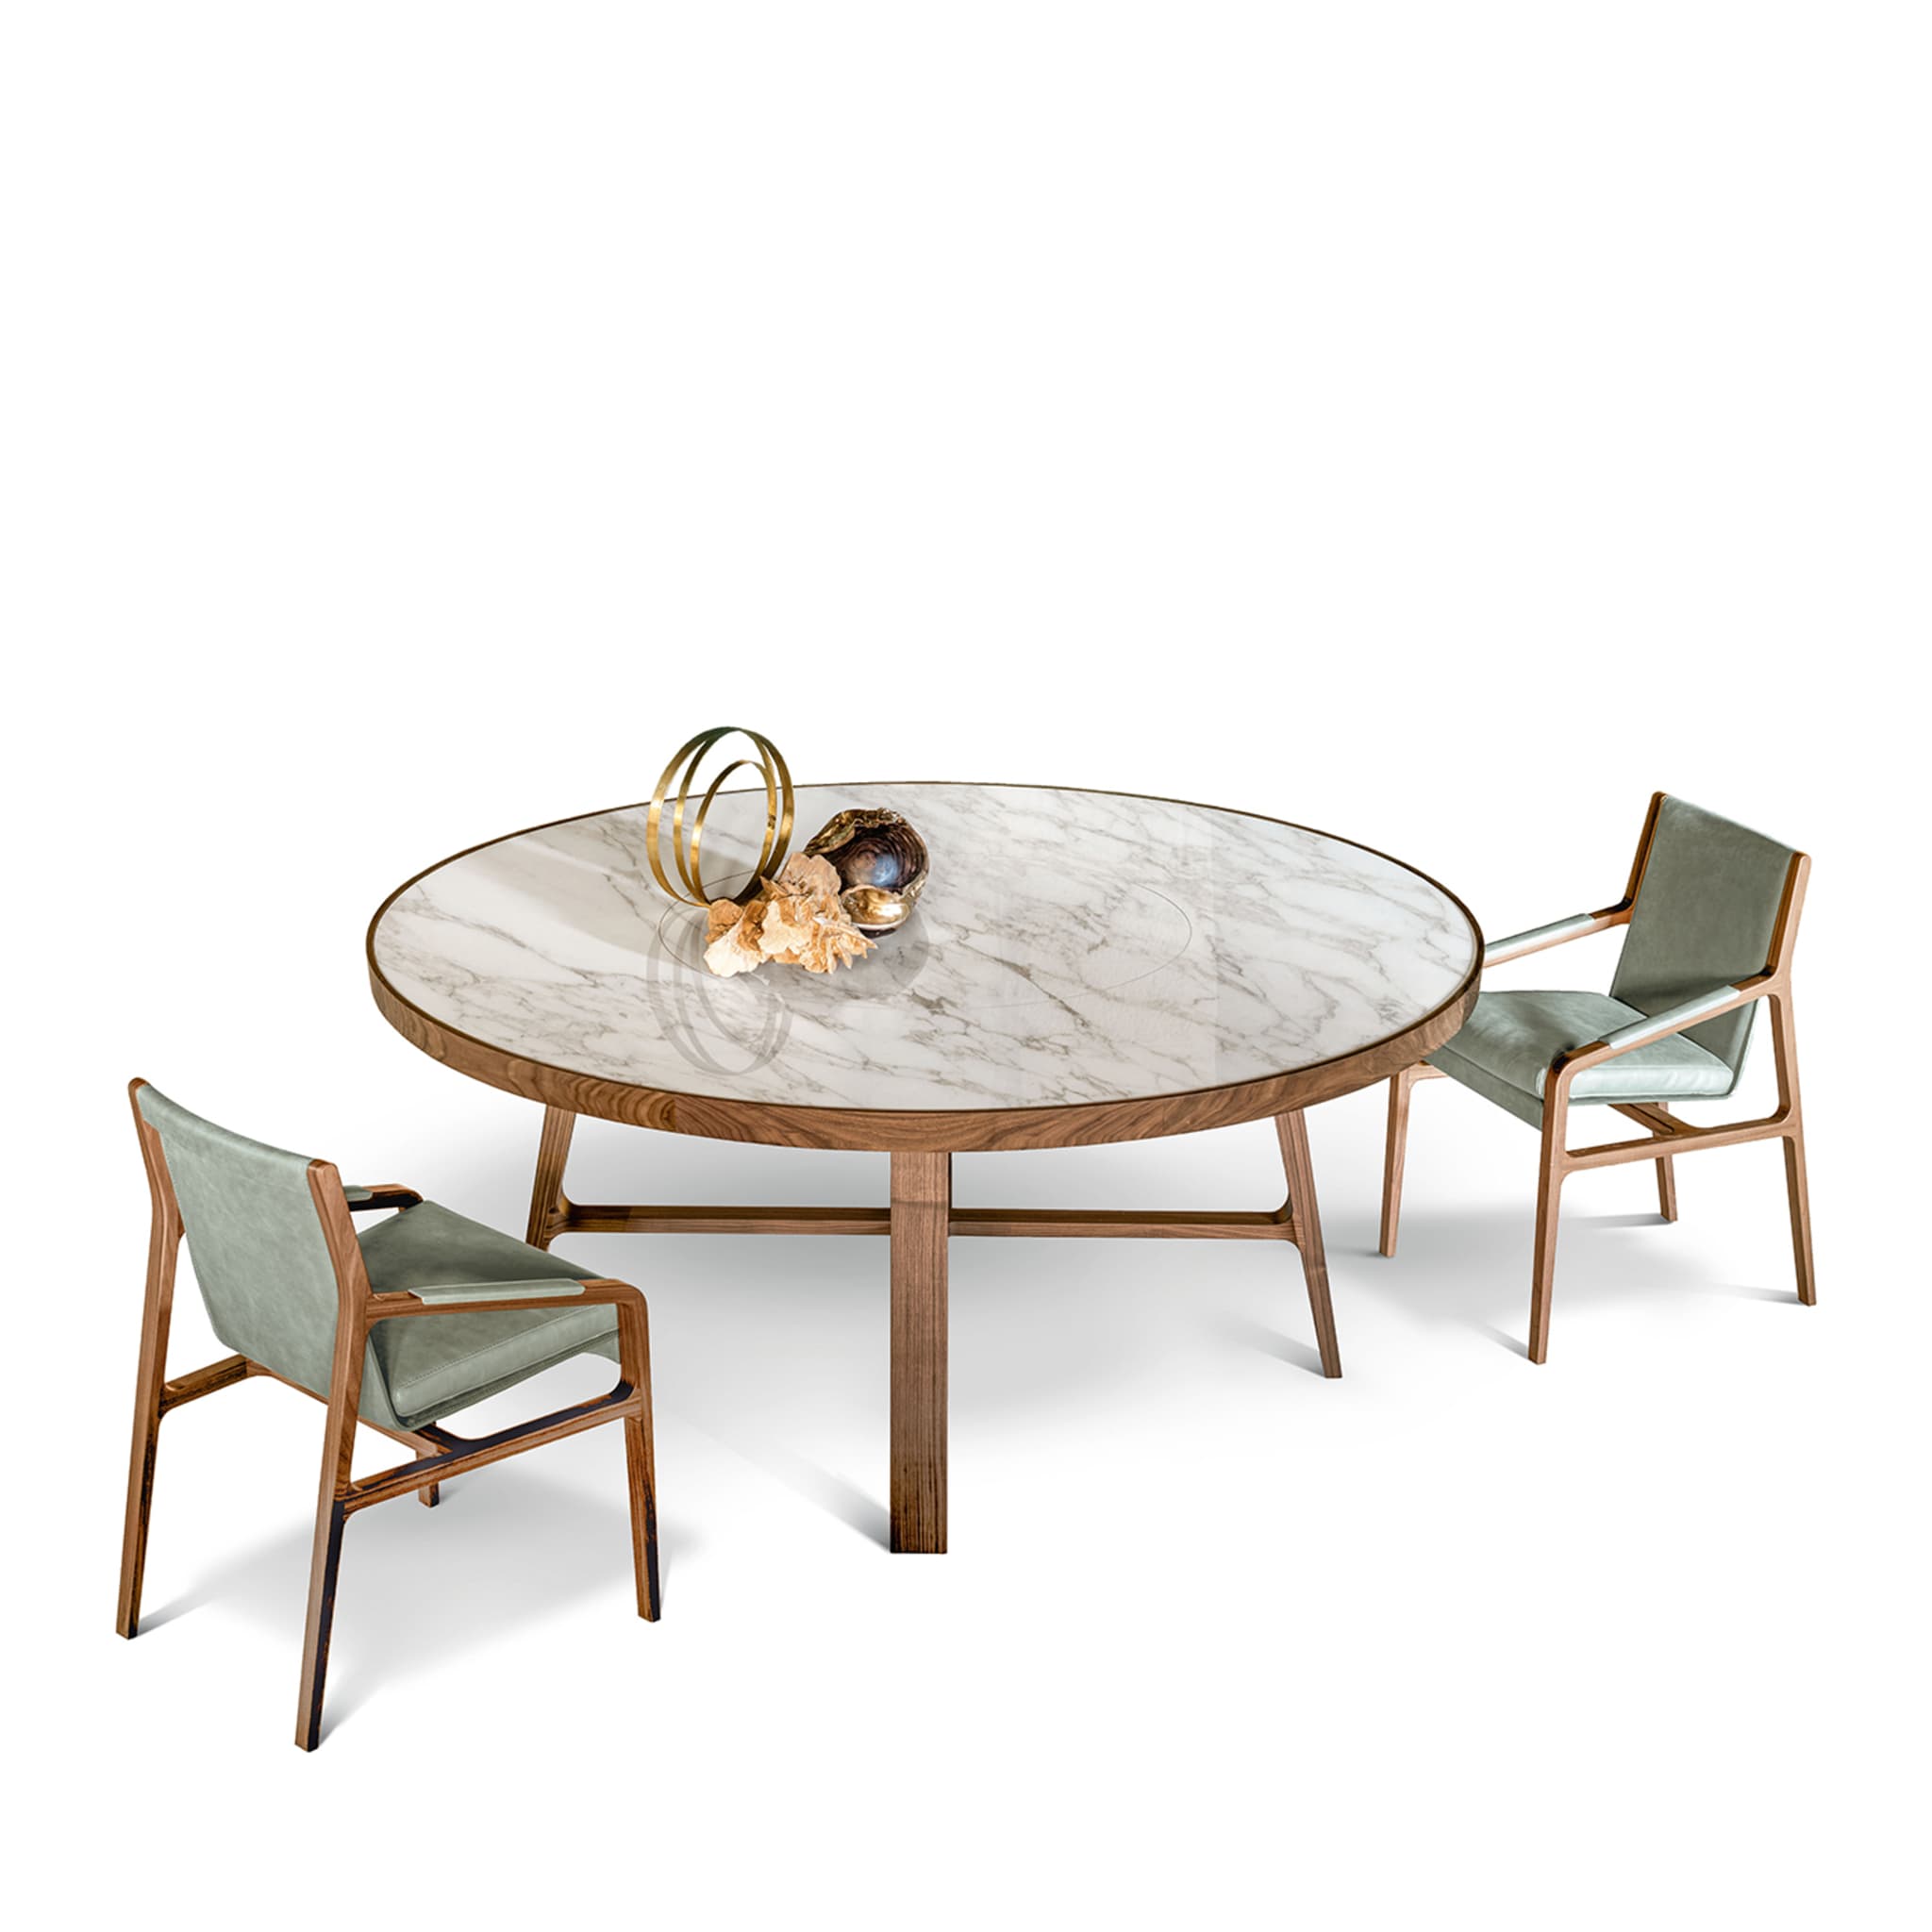 Compass Round Michelangelo marble & Walnut Dining Table by Giuseppe Bavuso - Alternative view 1